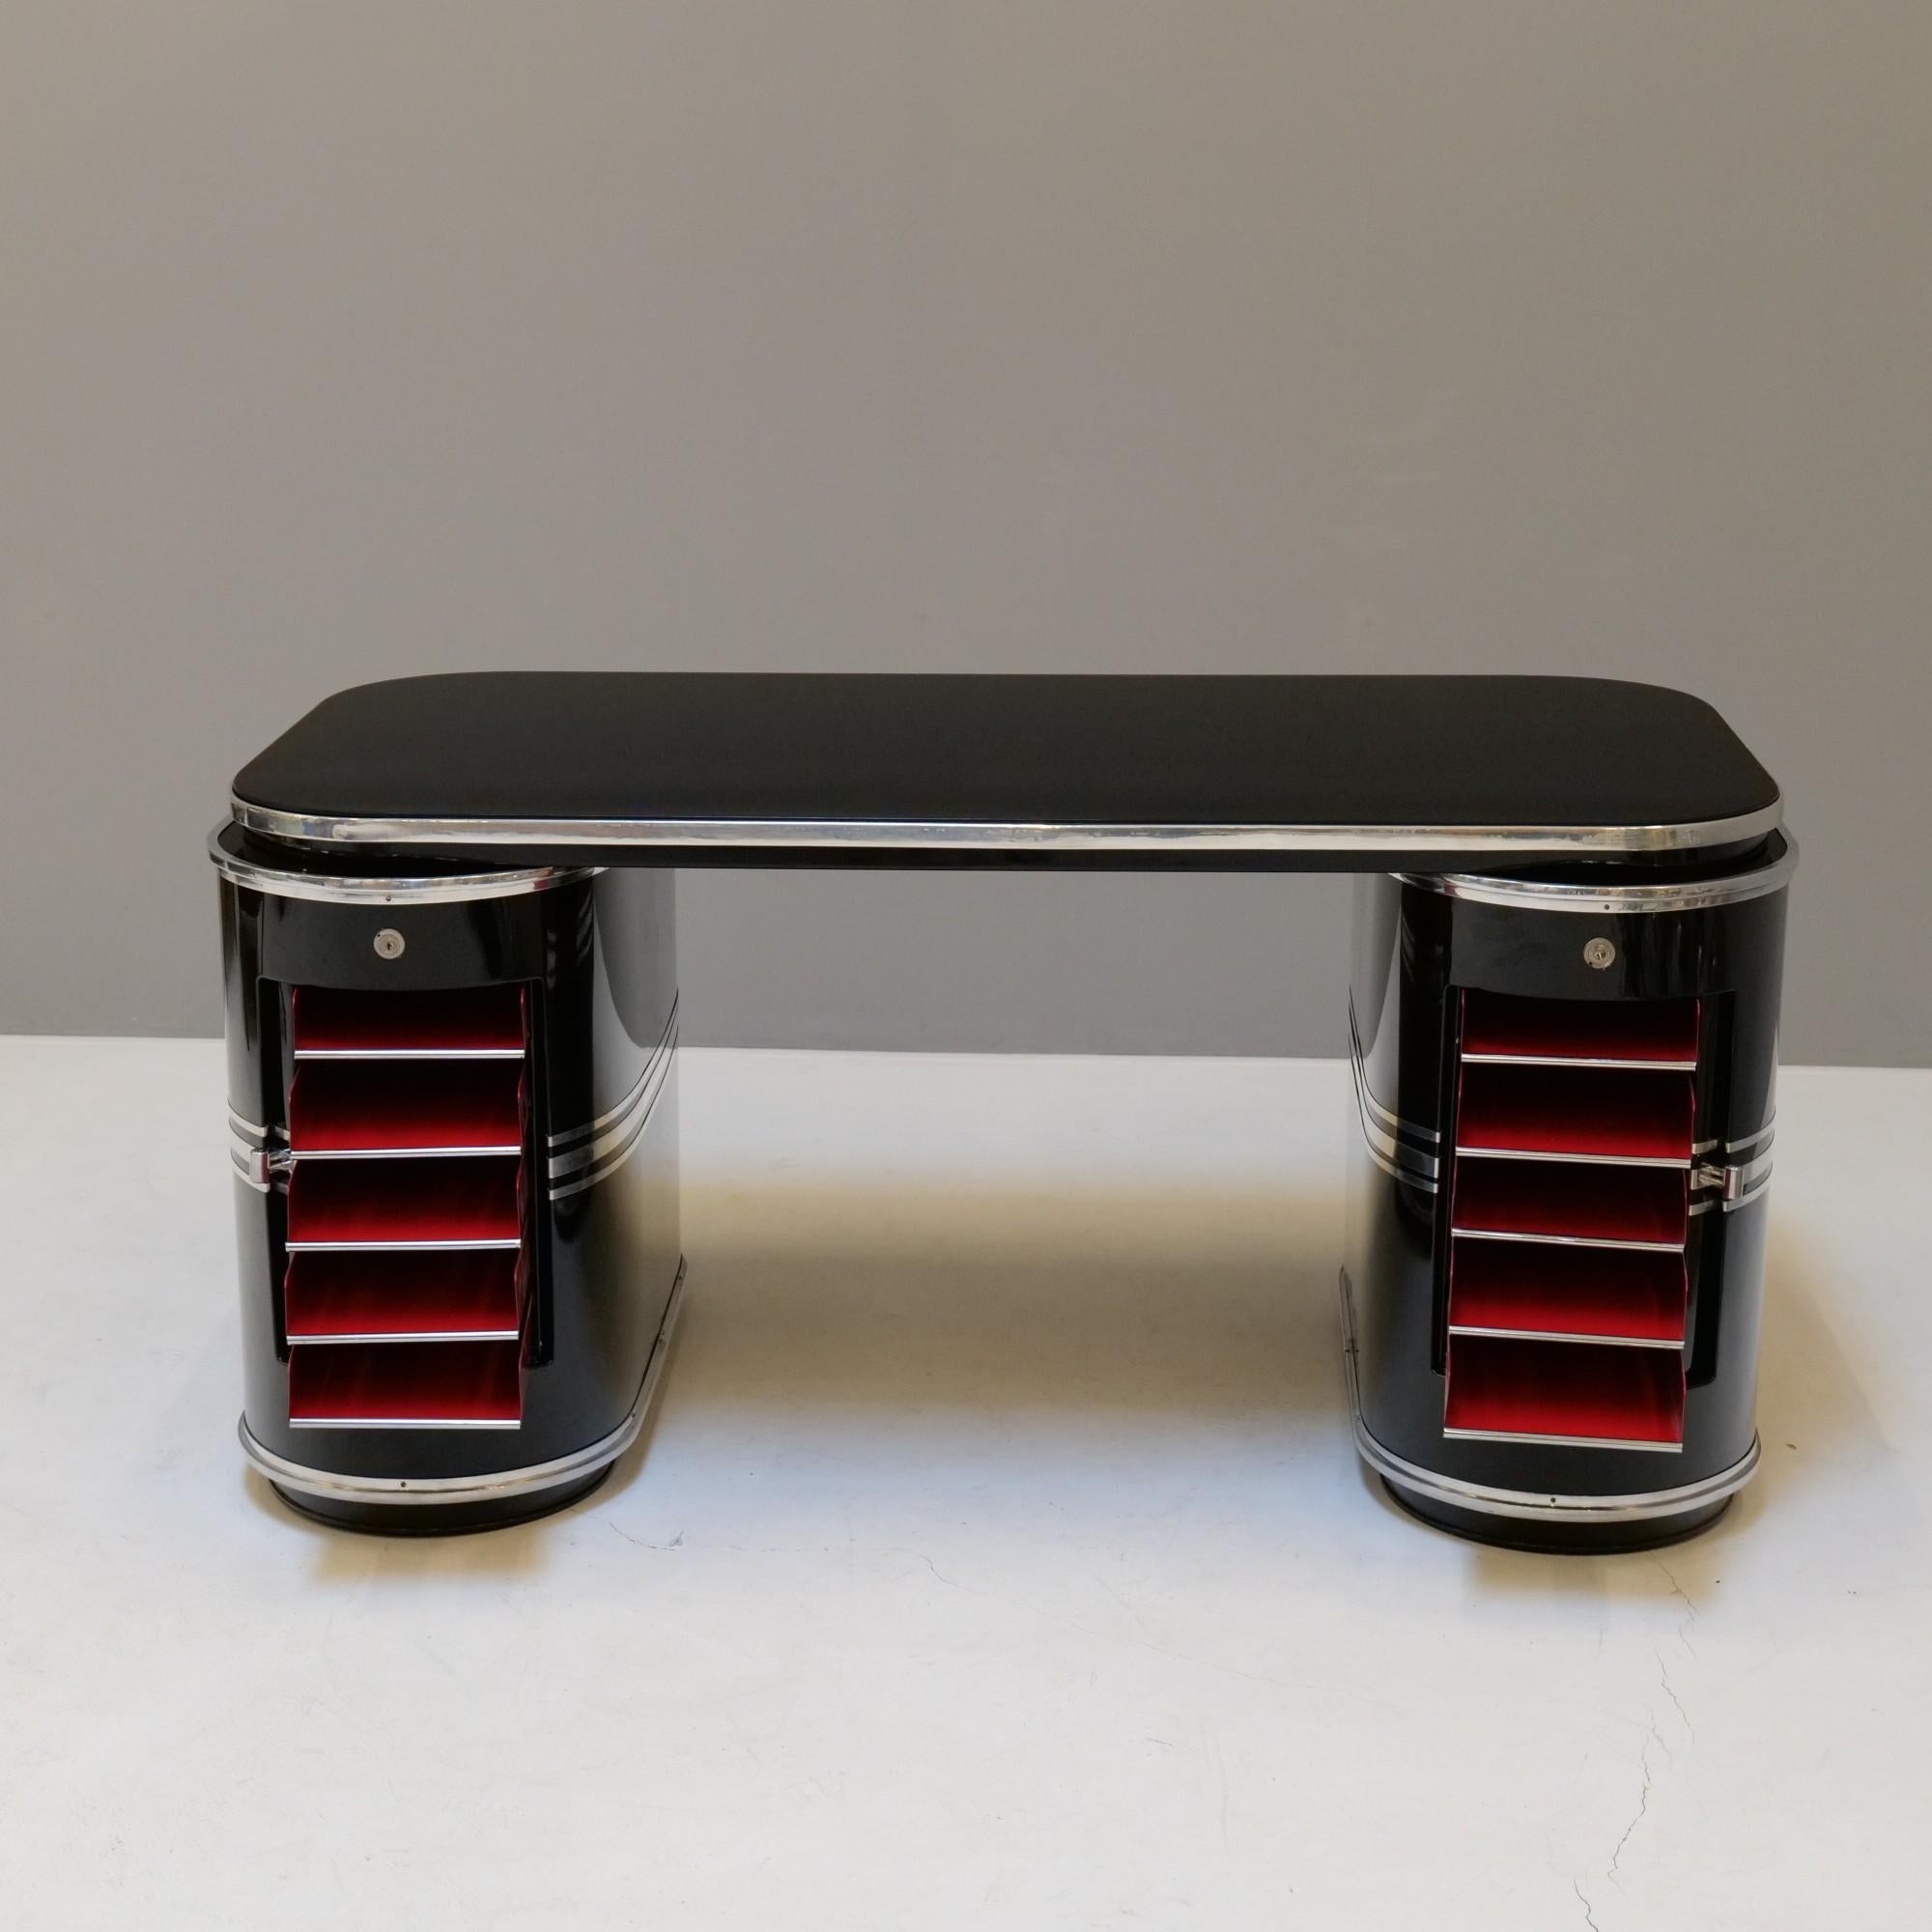 Metall Desk Modell Cologne from the Rundoform Series.

Exceptional design known from shown in many hollywood movies.

Tree parts: two metal cylindric drawers and a metal desk top finished with a glass plate.

materials:
metall, glass
 

This